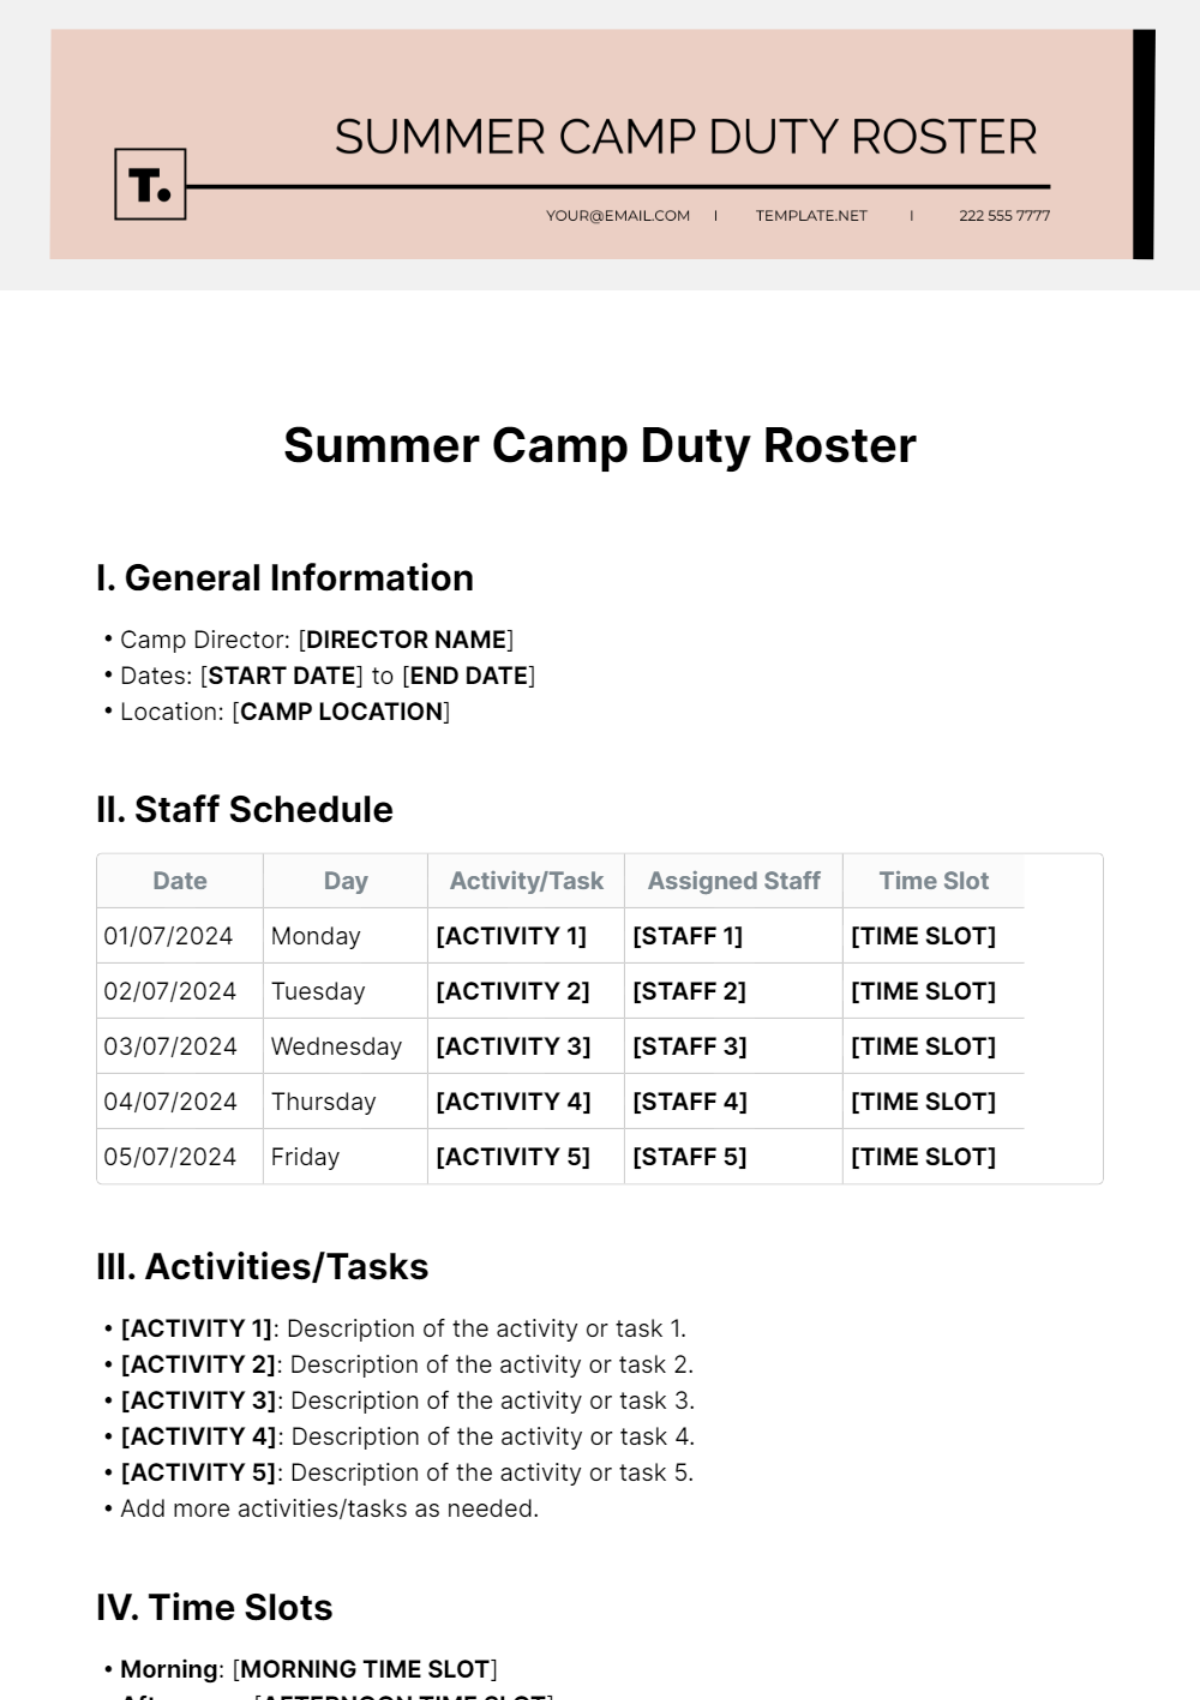 Summer Camp Duty Roster Template